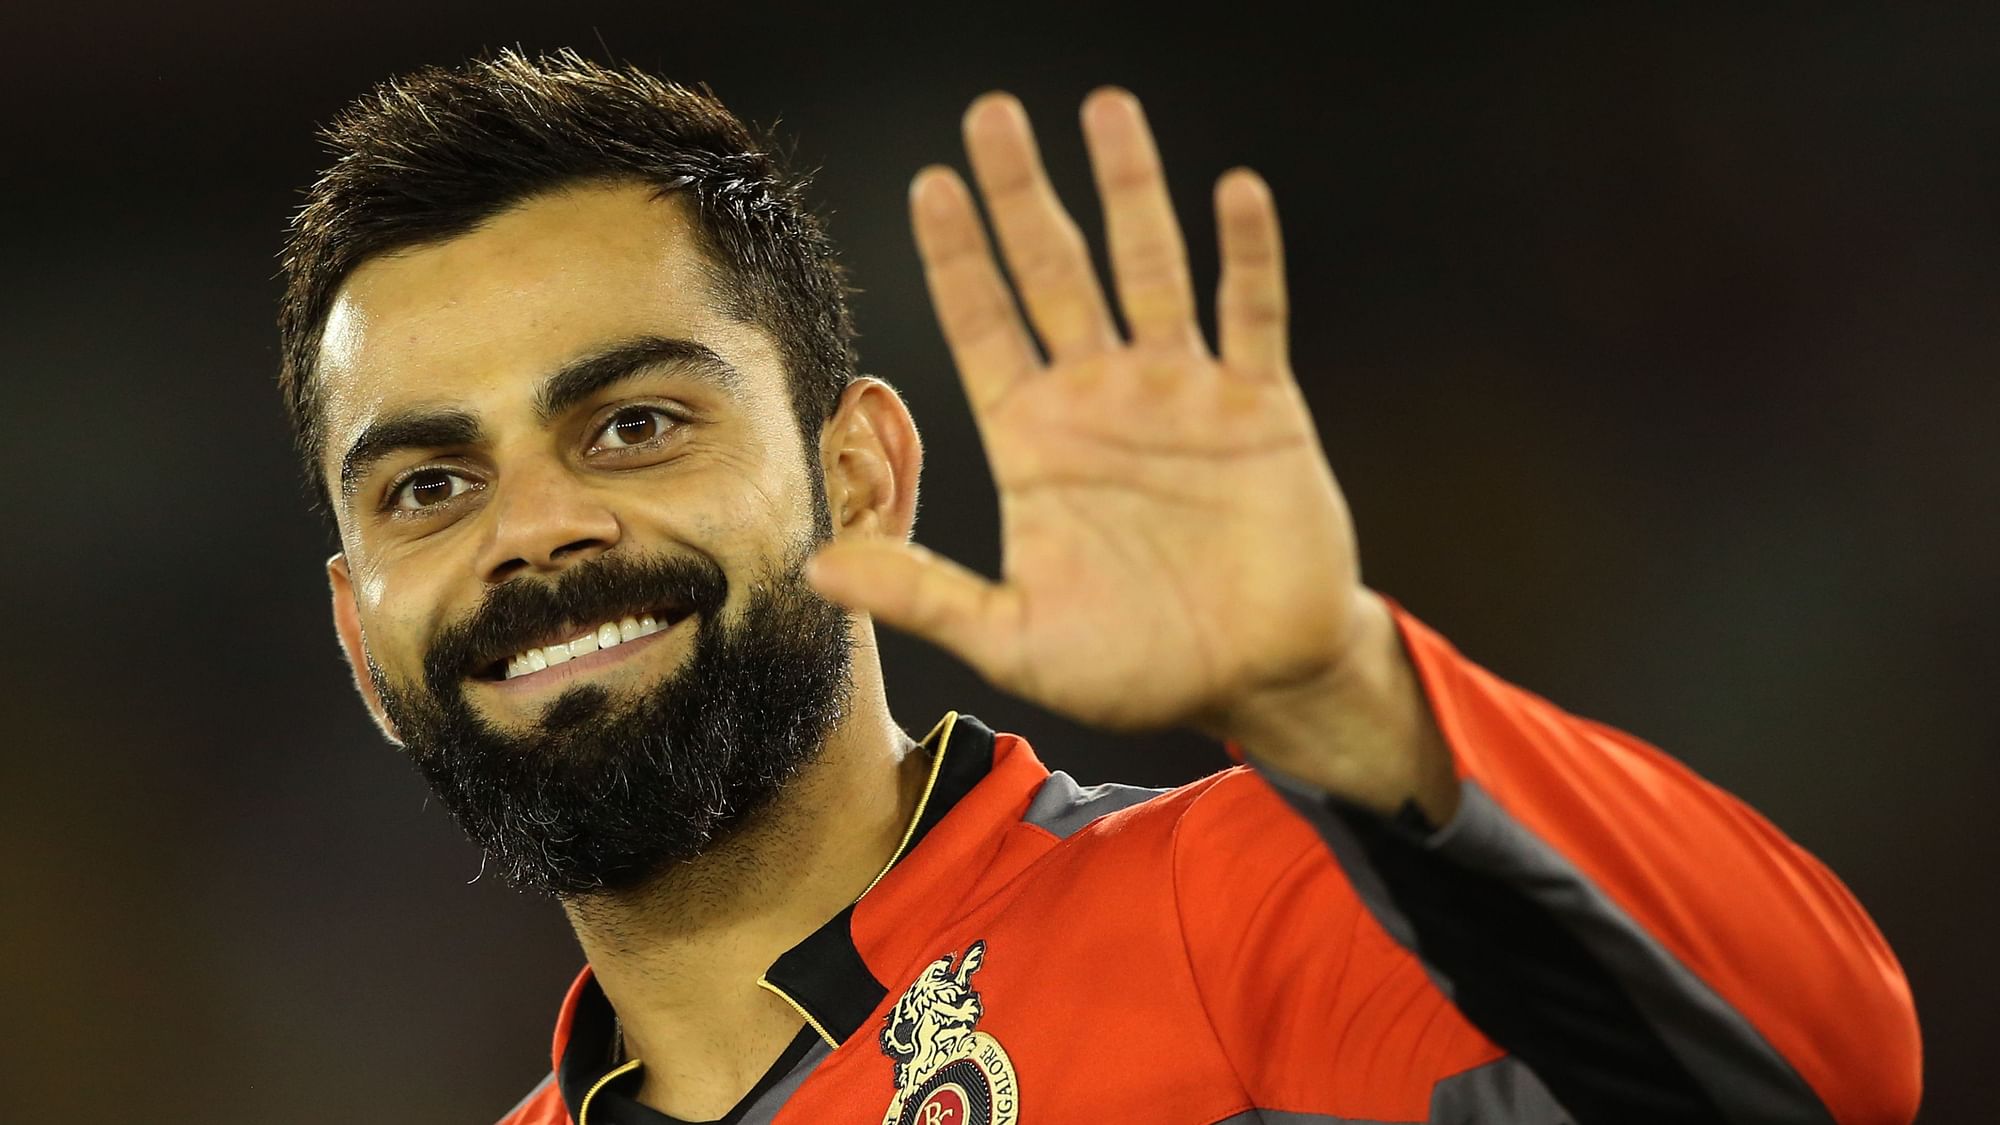 Royal Challengers Bangalore captain Virat Kohli was fined after his team’s win against Kings XI Punjab in Mohali.